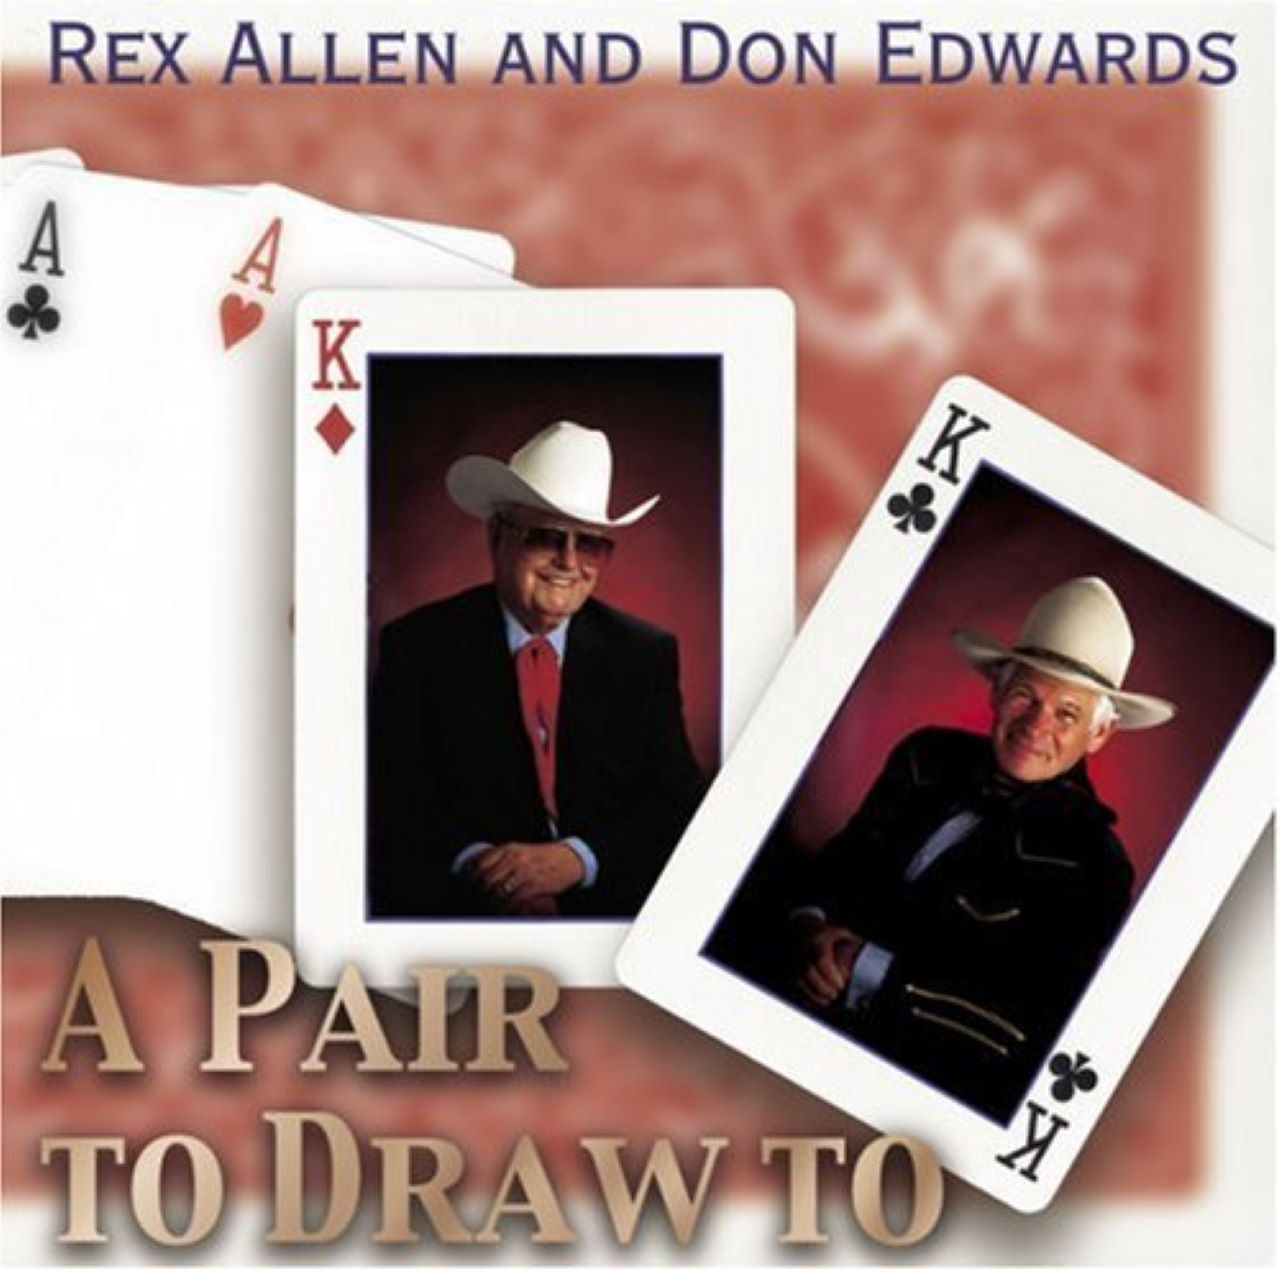 Rex Allen & Don Edwards - A Pair To Draw To cover album